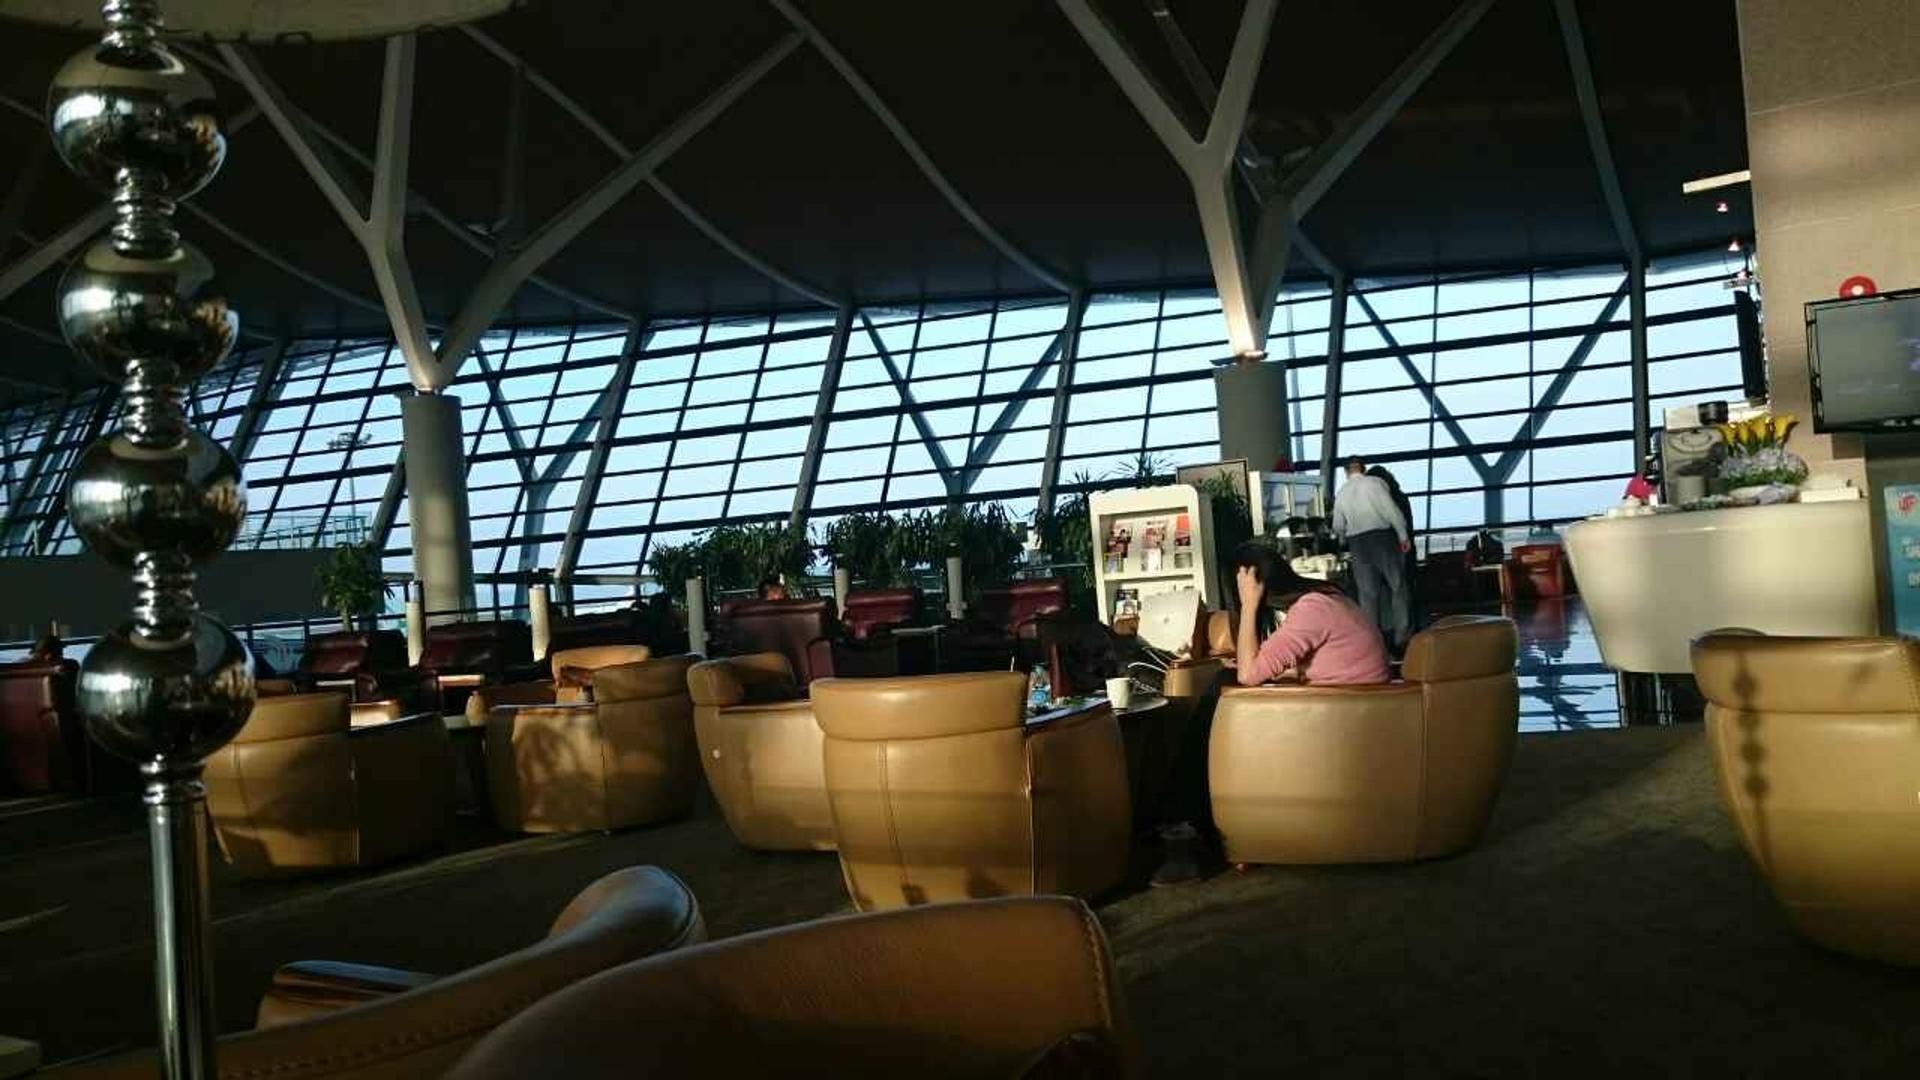 No. 90 Air China Domestic First & Business Class Lounge image 1 of 1